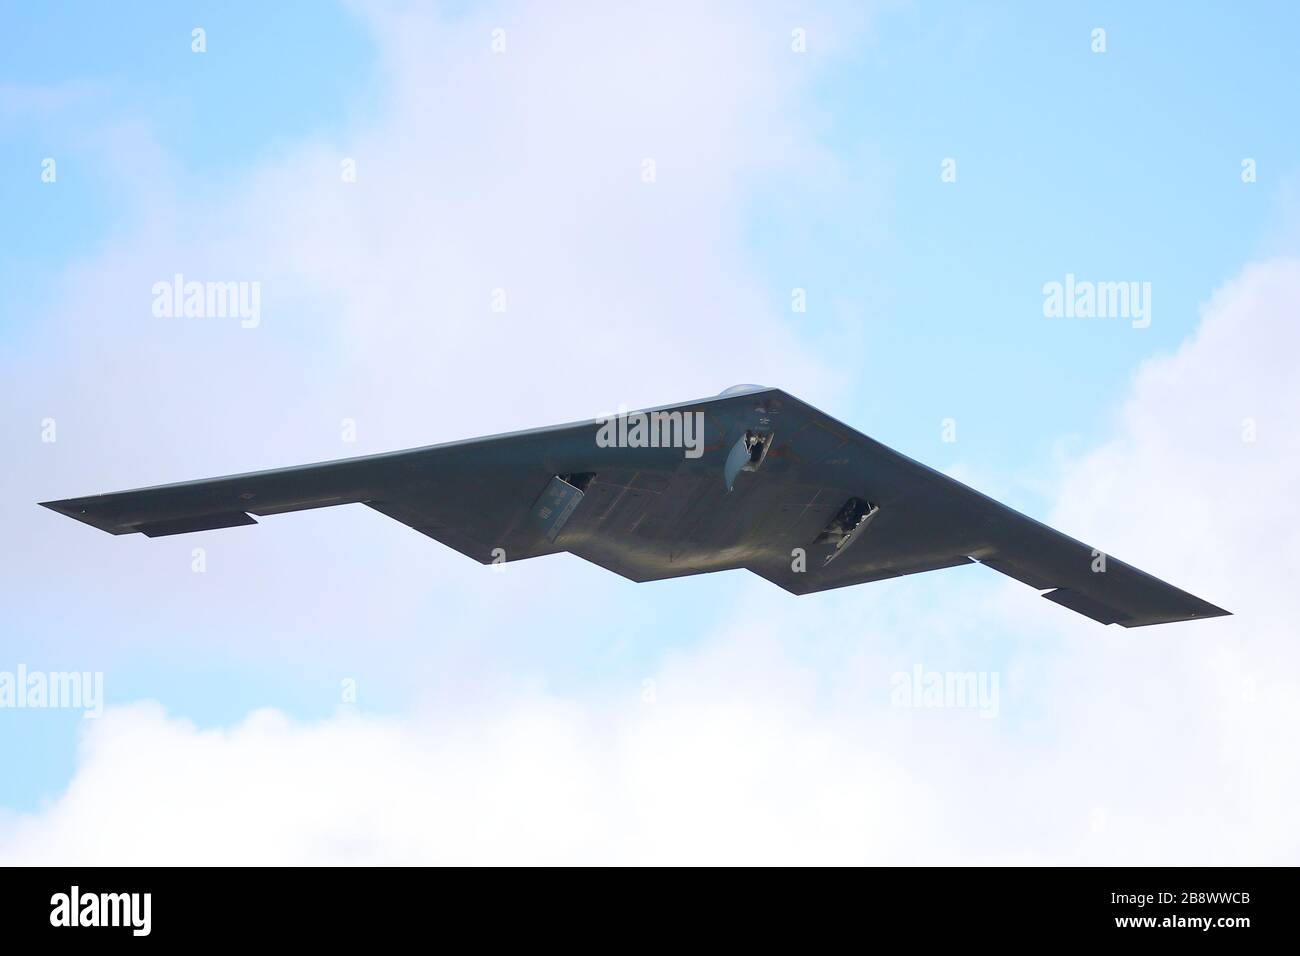 Northrop Grumman B-2 Spirit stealth bomber leaving for the USA after exercises in Europe, RAF Fairford, UK Stock Photo